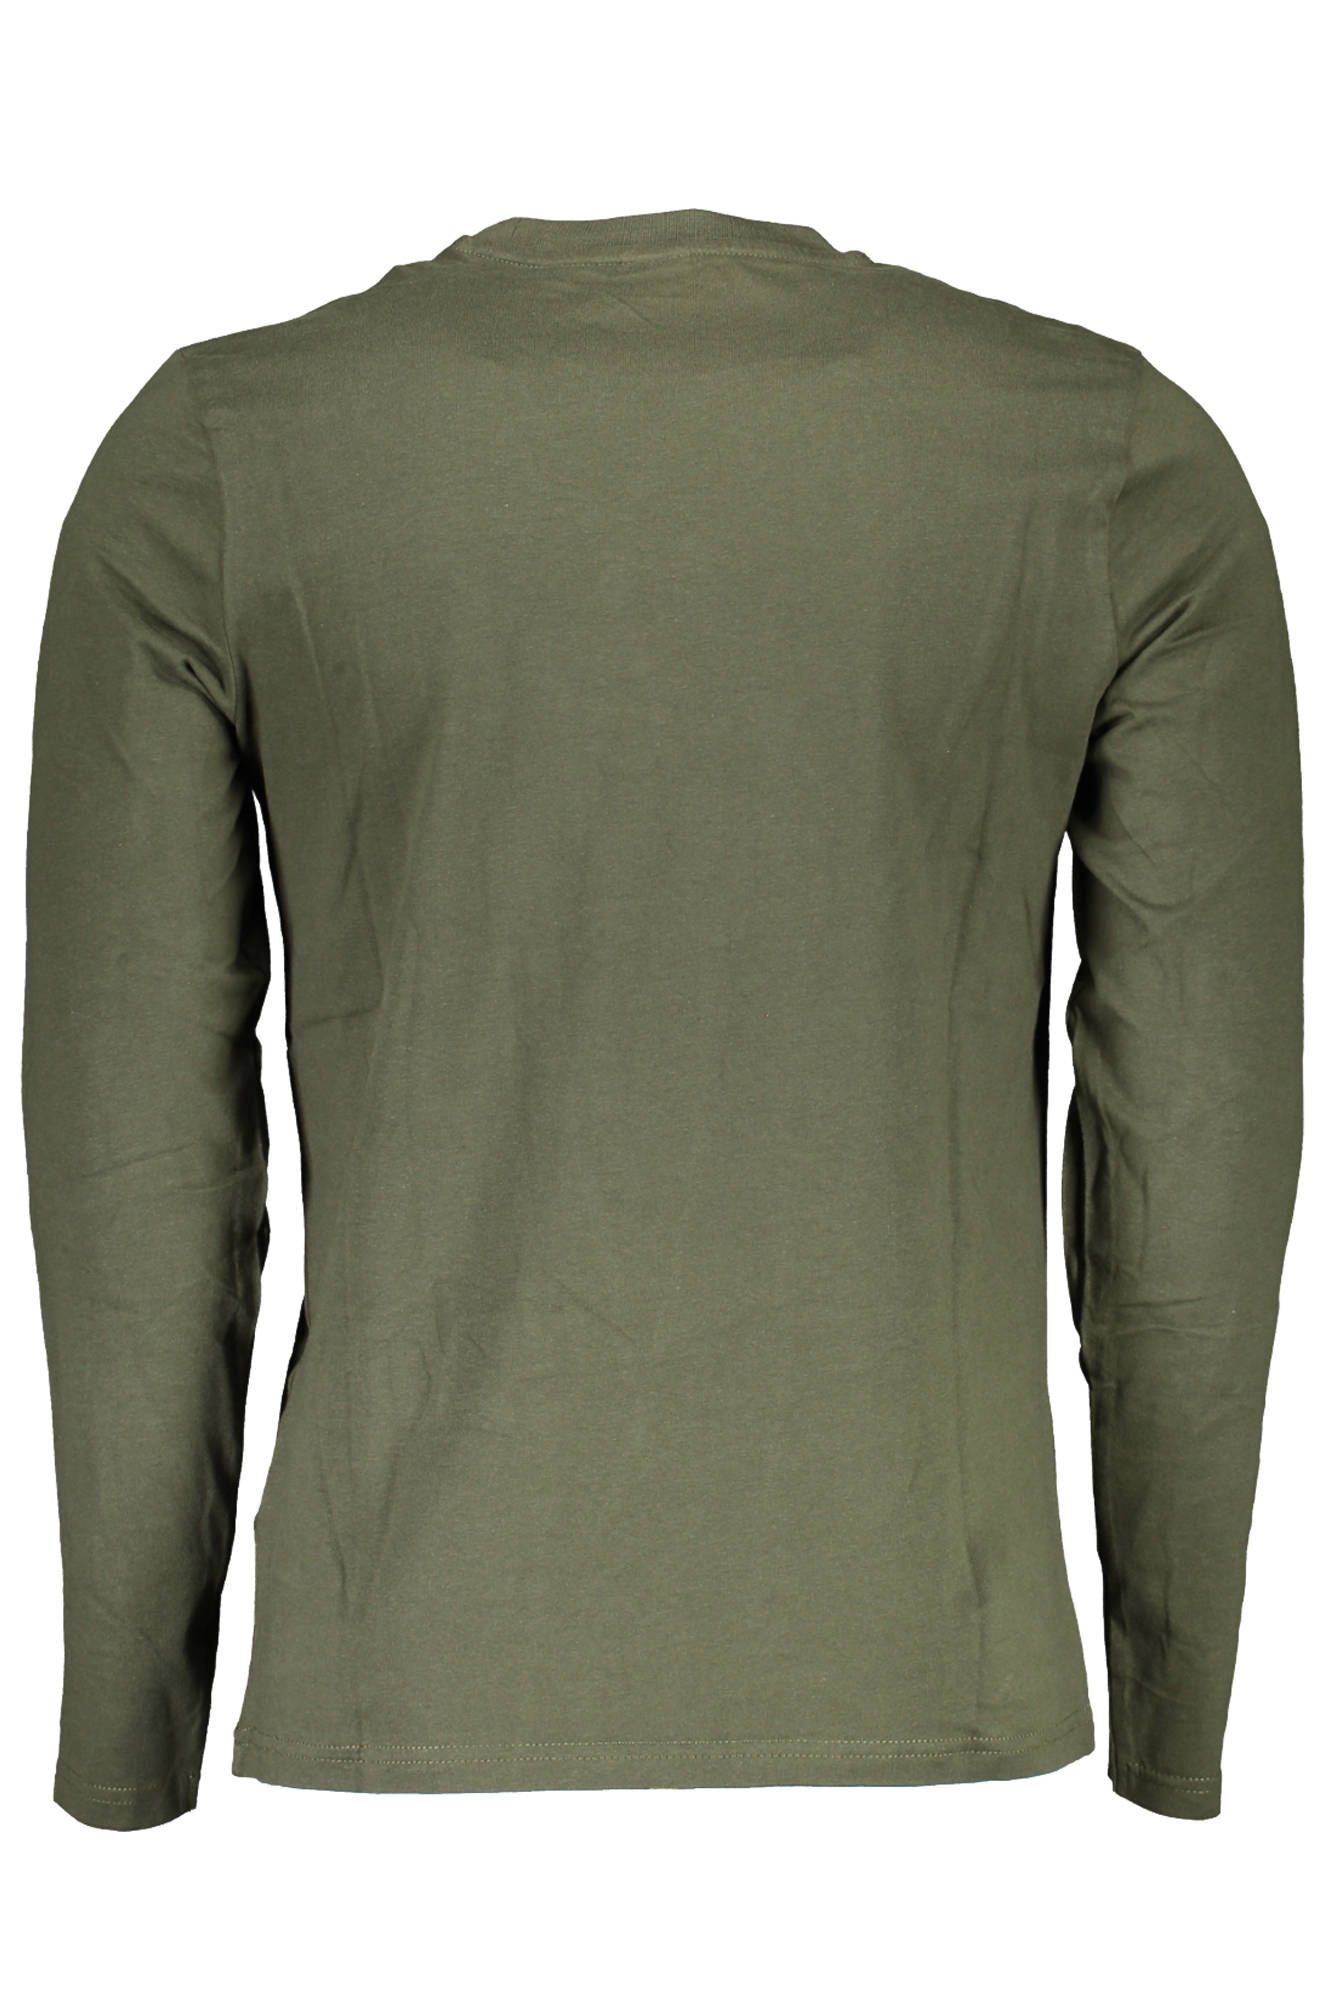 North Sails Chic Green Long Sleeve Cotton Tee